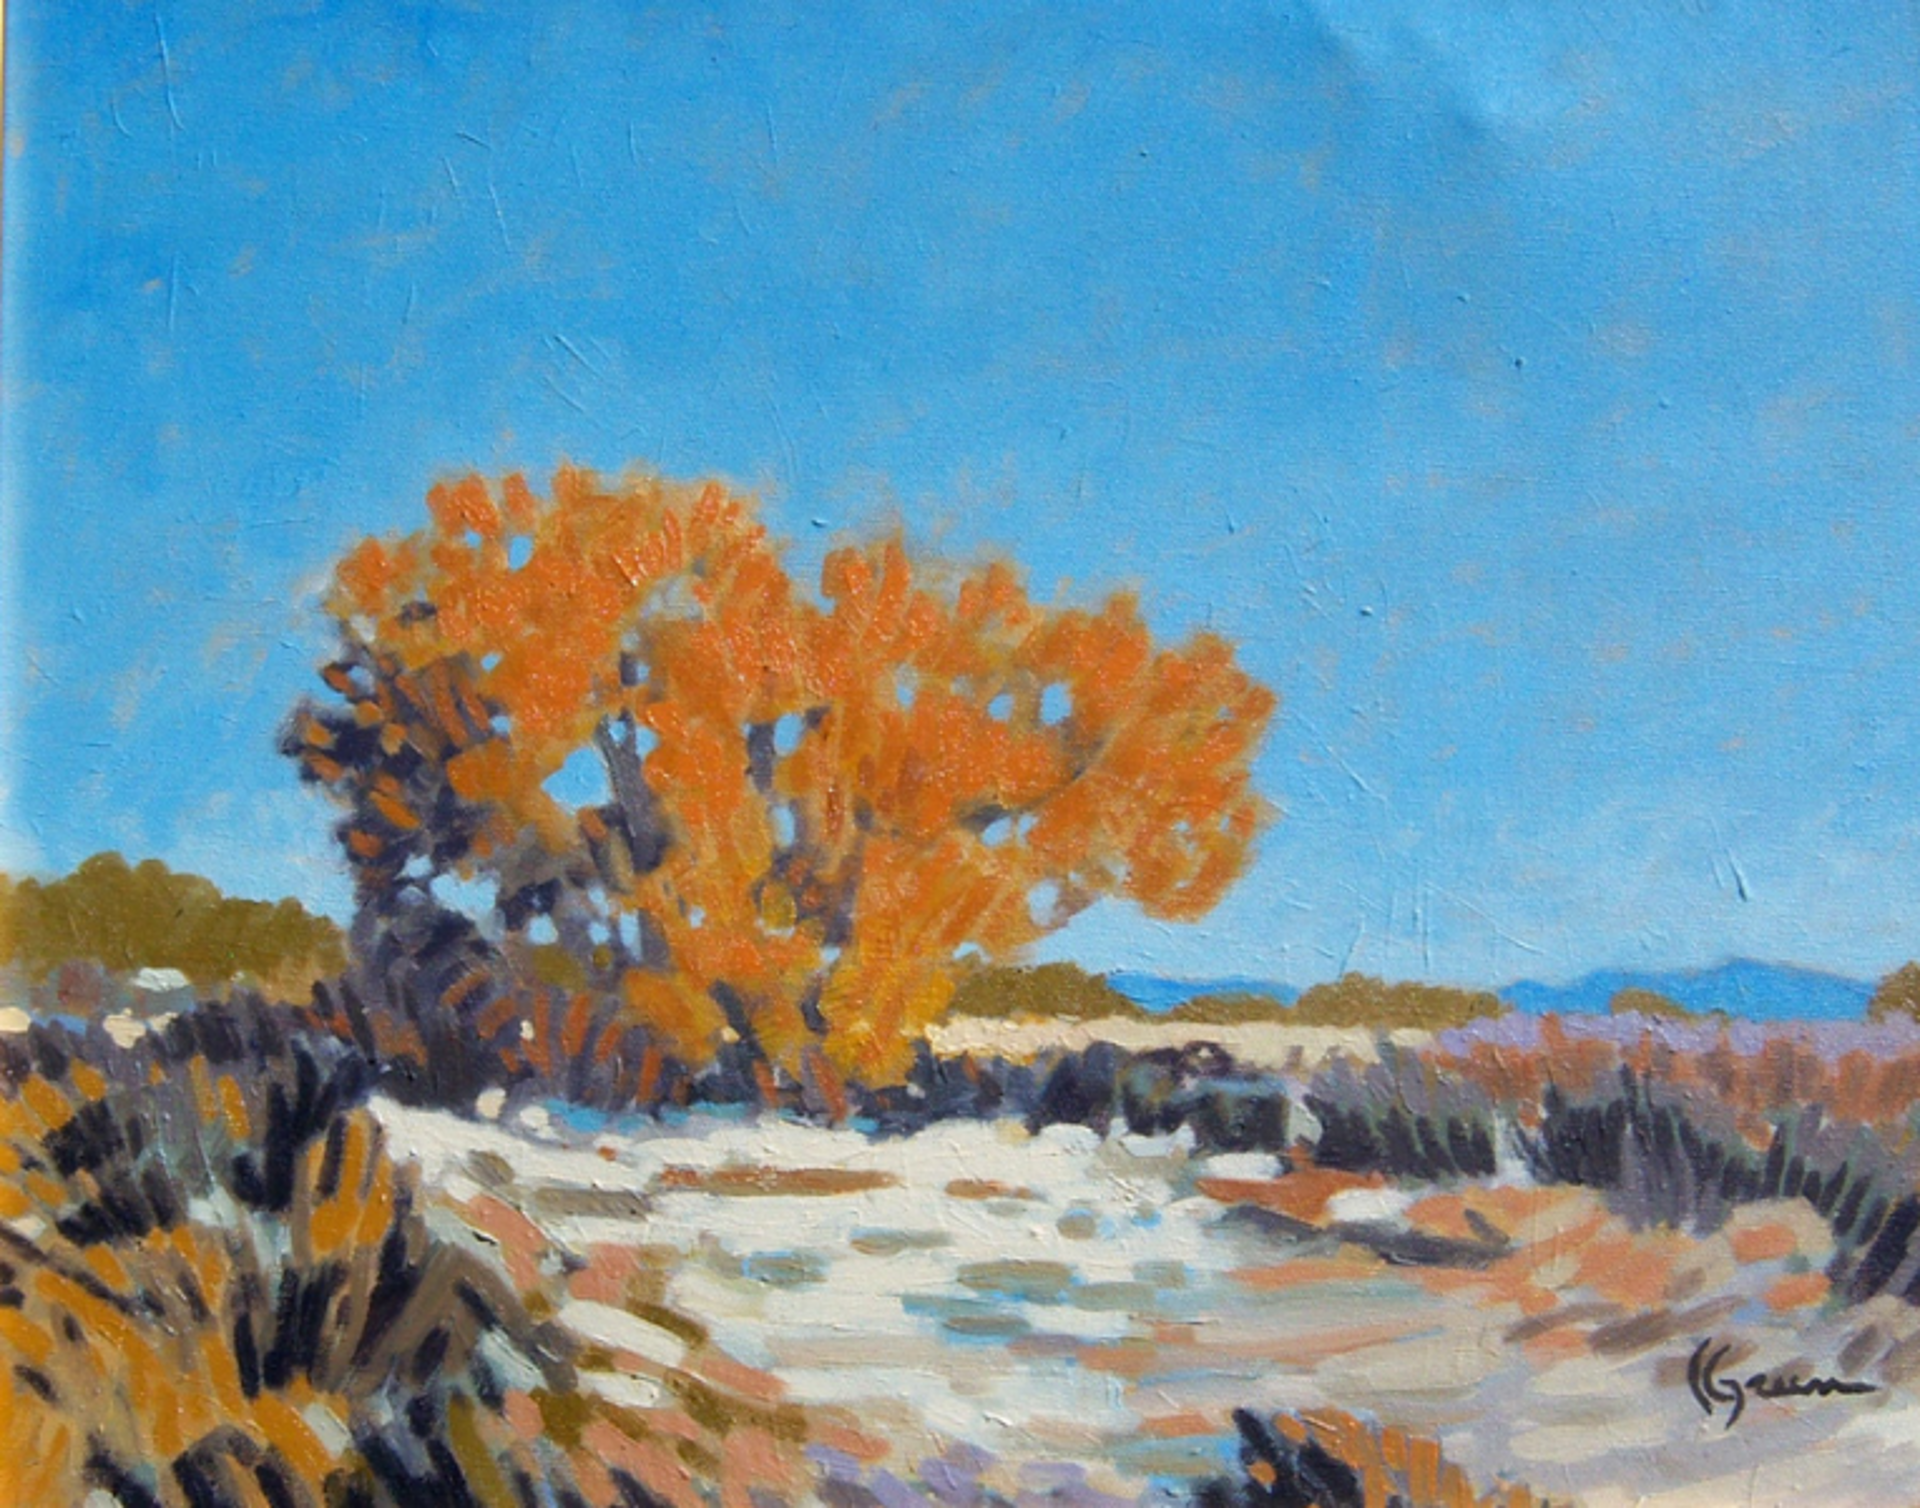 Autumn Canyon Scene by Kenneth Green